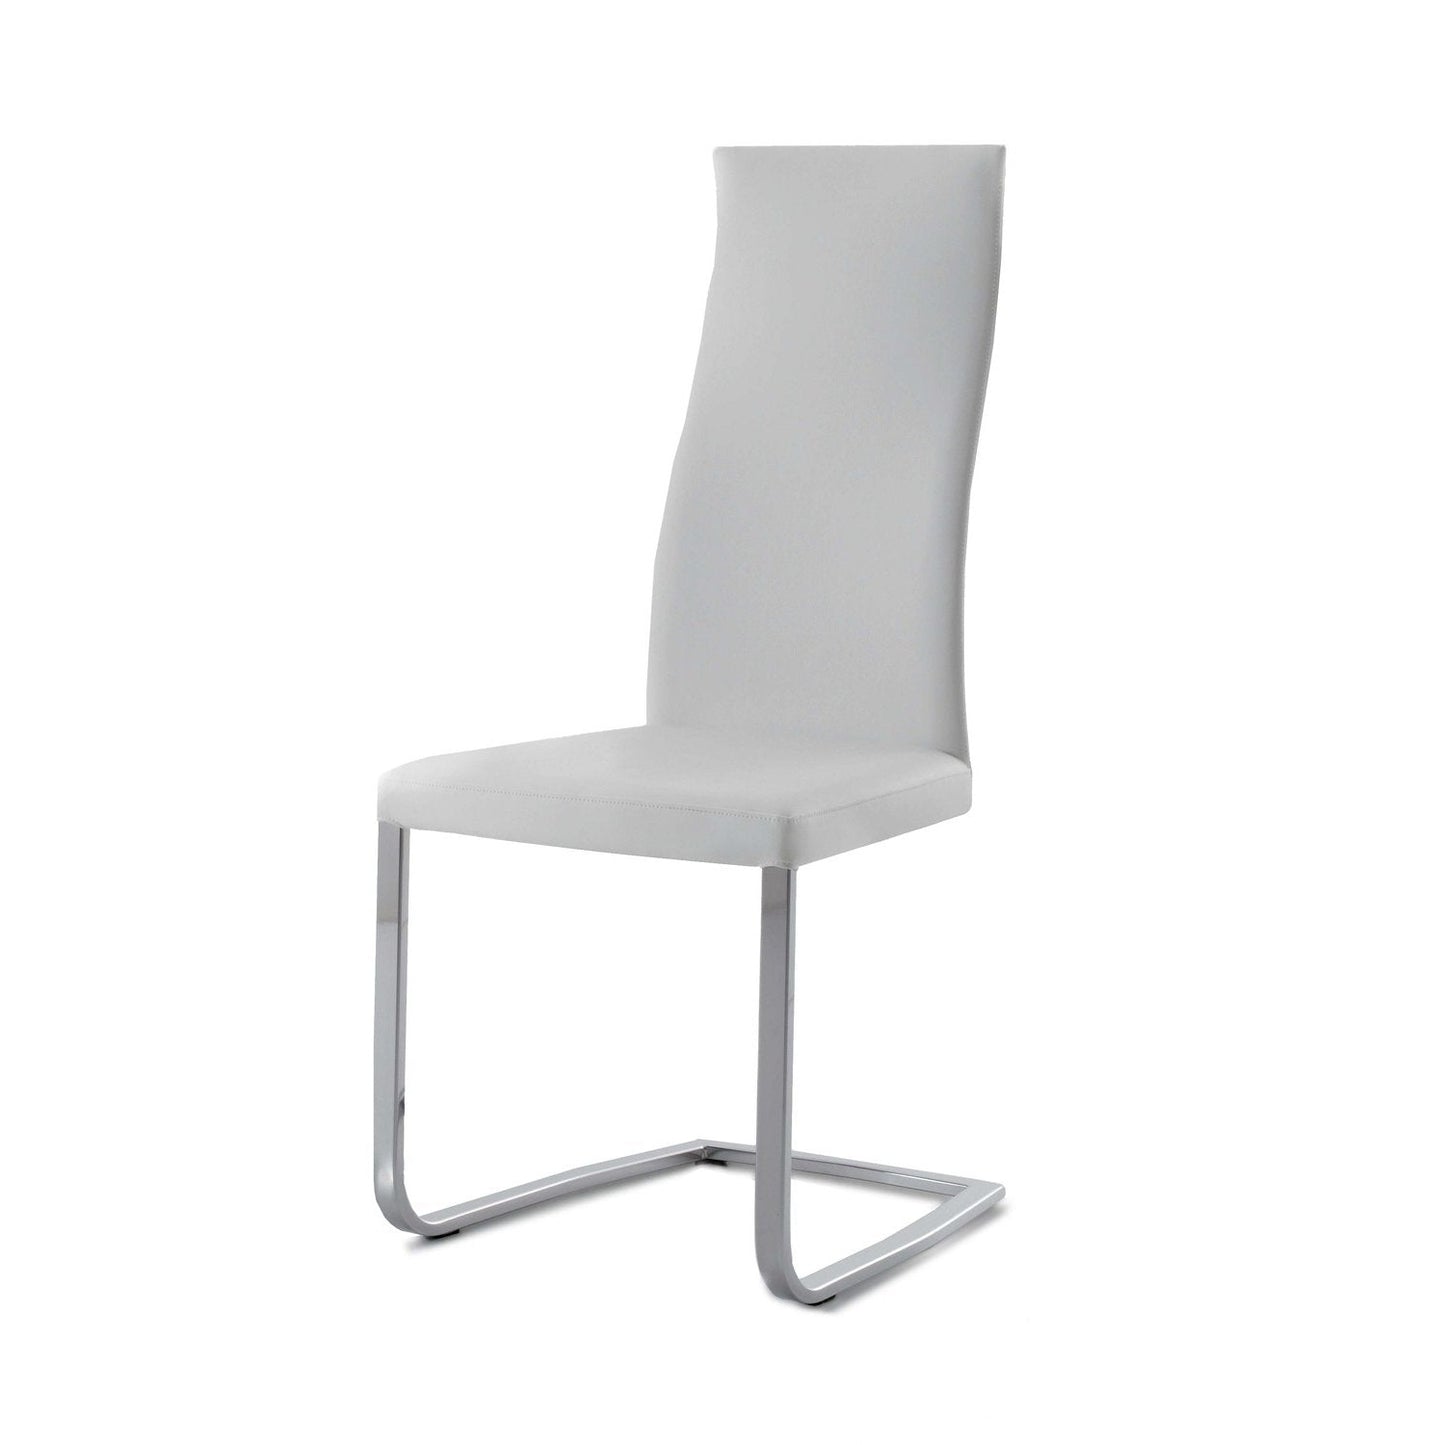 Slim dining chair in upholstery leather by Compar